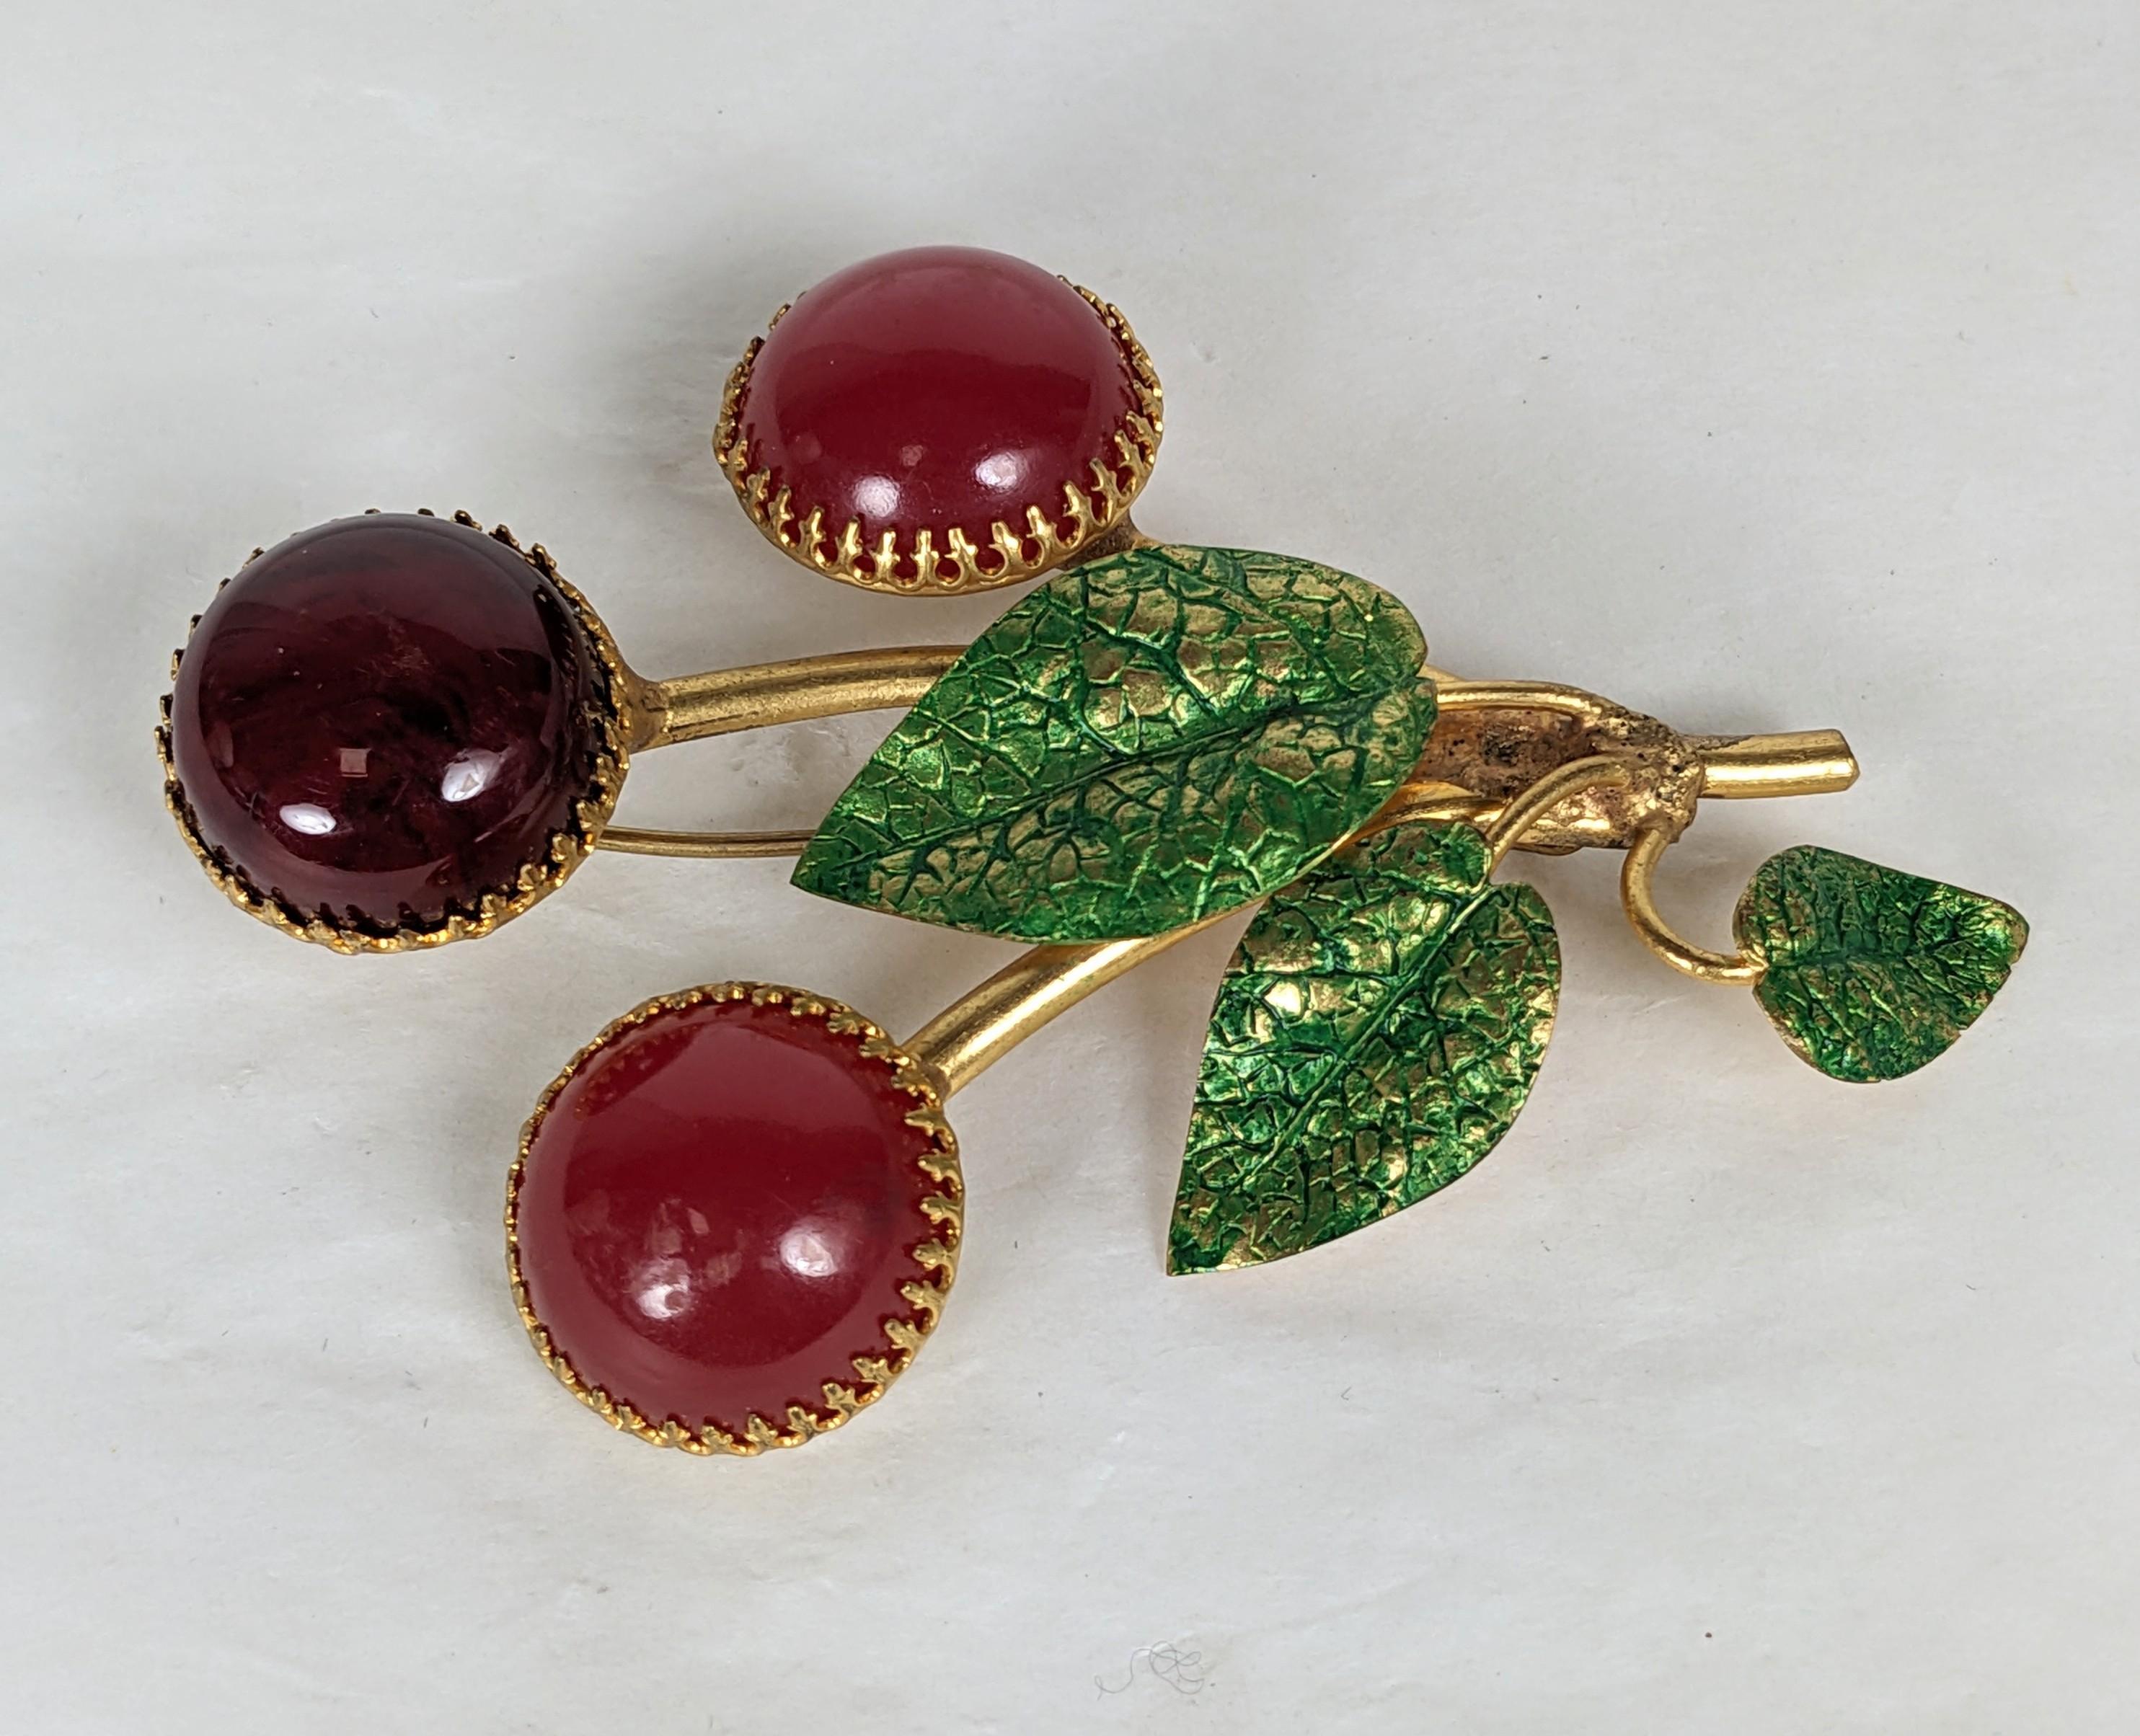 Countess Cis Bakelite Cherry Brooch In Excellent Condition For Sale In New York, NY